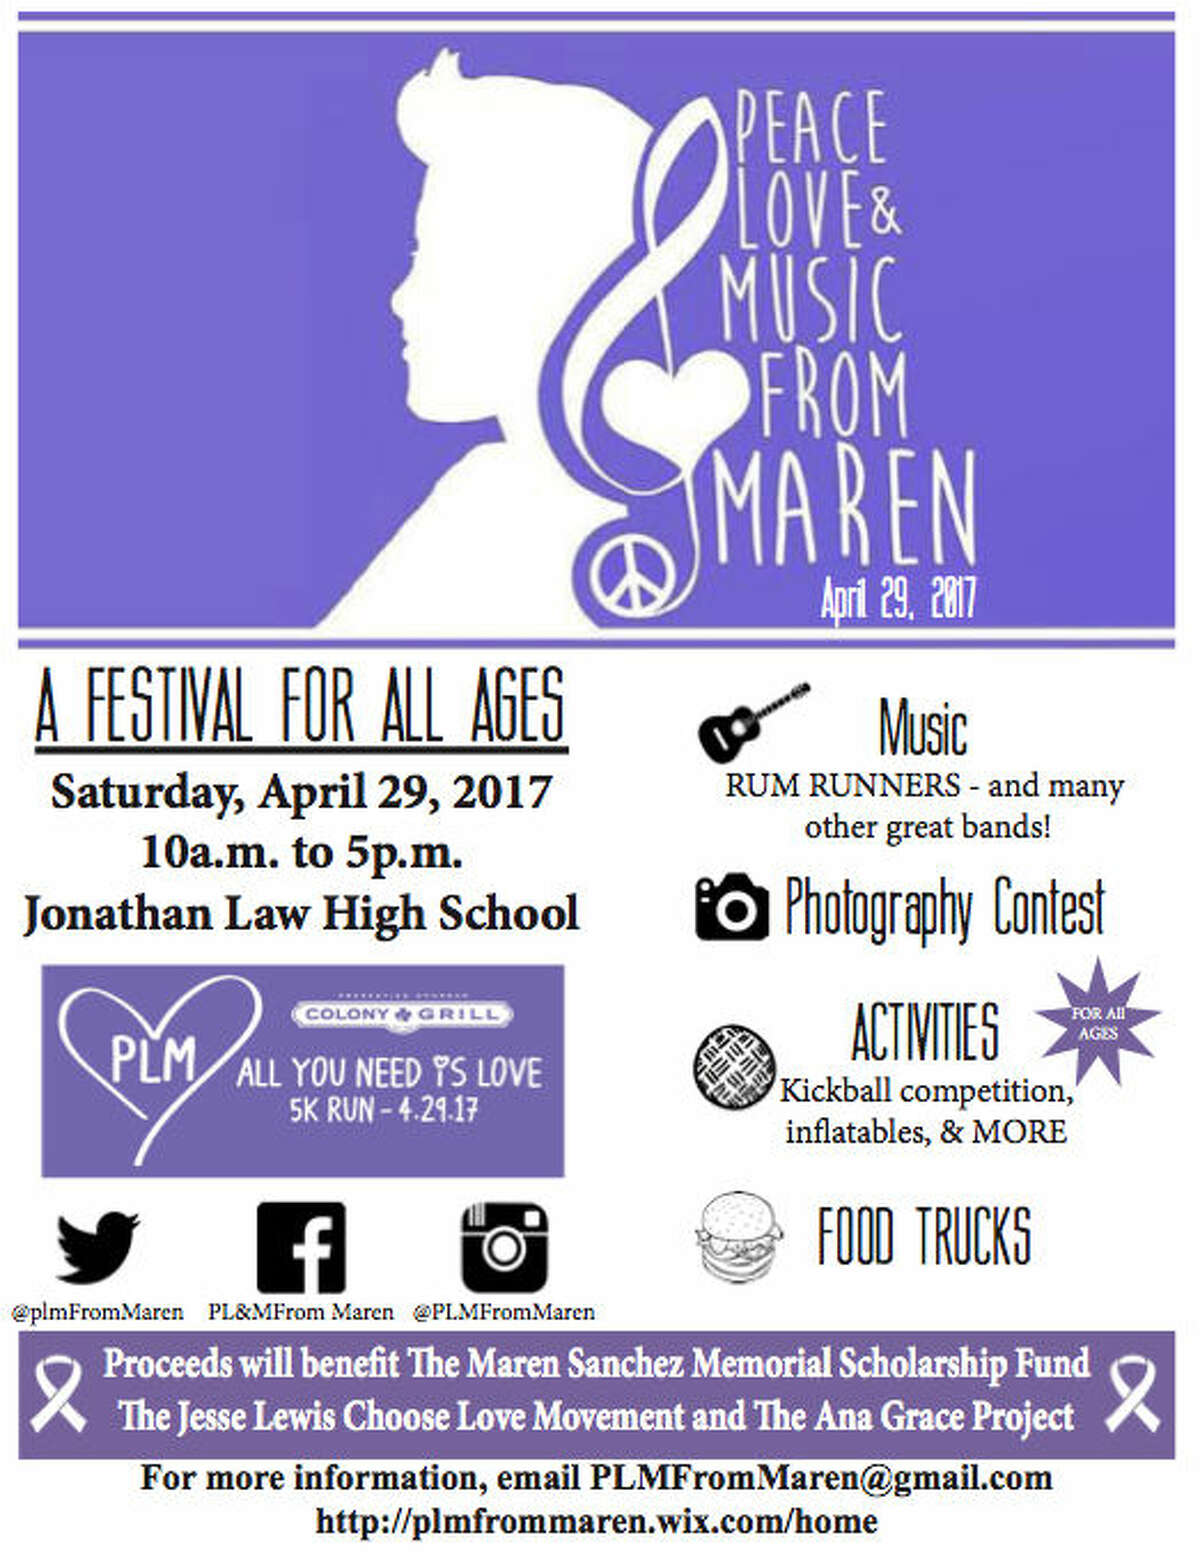 The 3rd Annual PLM Festival will take place on April 29 at Jonathan Law High School. This is a wonderful family day full of delicious food, awesome fun & incredible activities like hi-end inflatables! The day starts with a 5K and music plays throughout with many favorite local bands. Admission free!